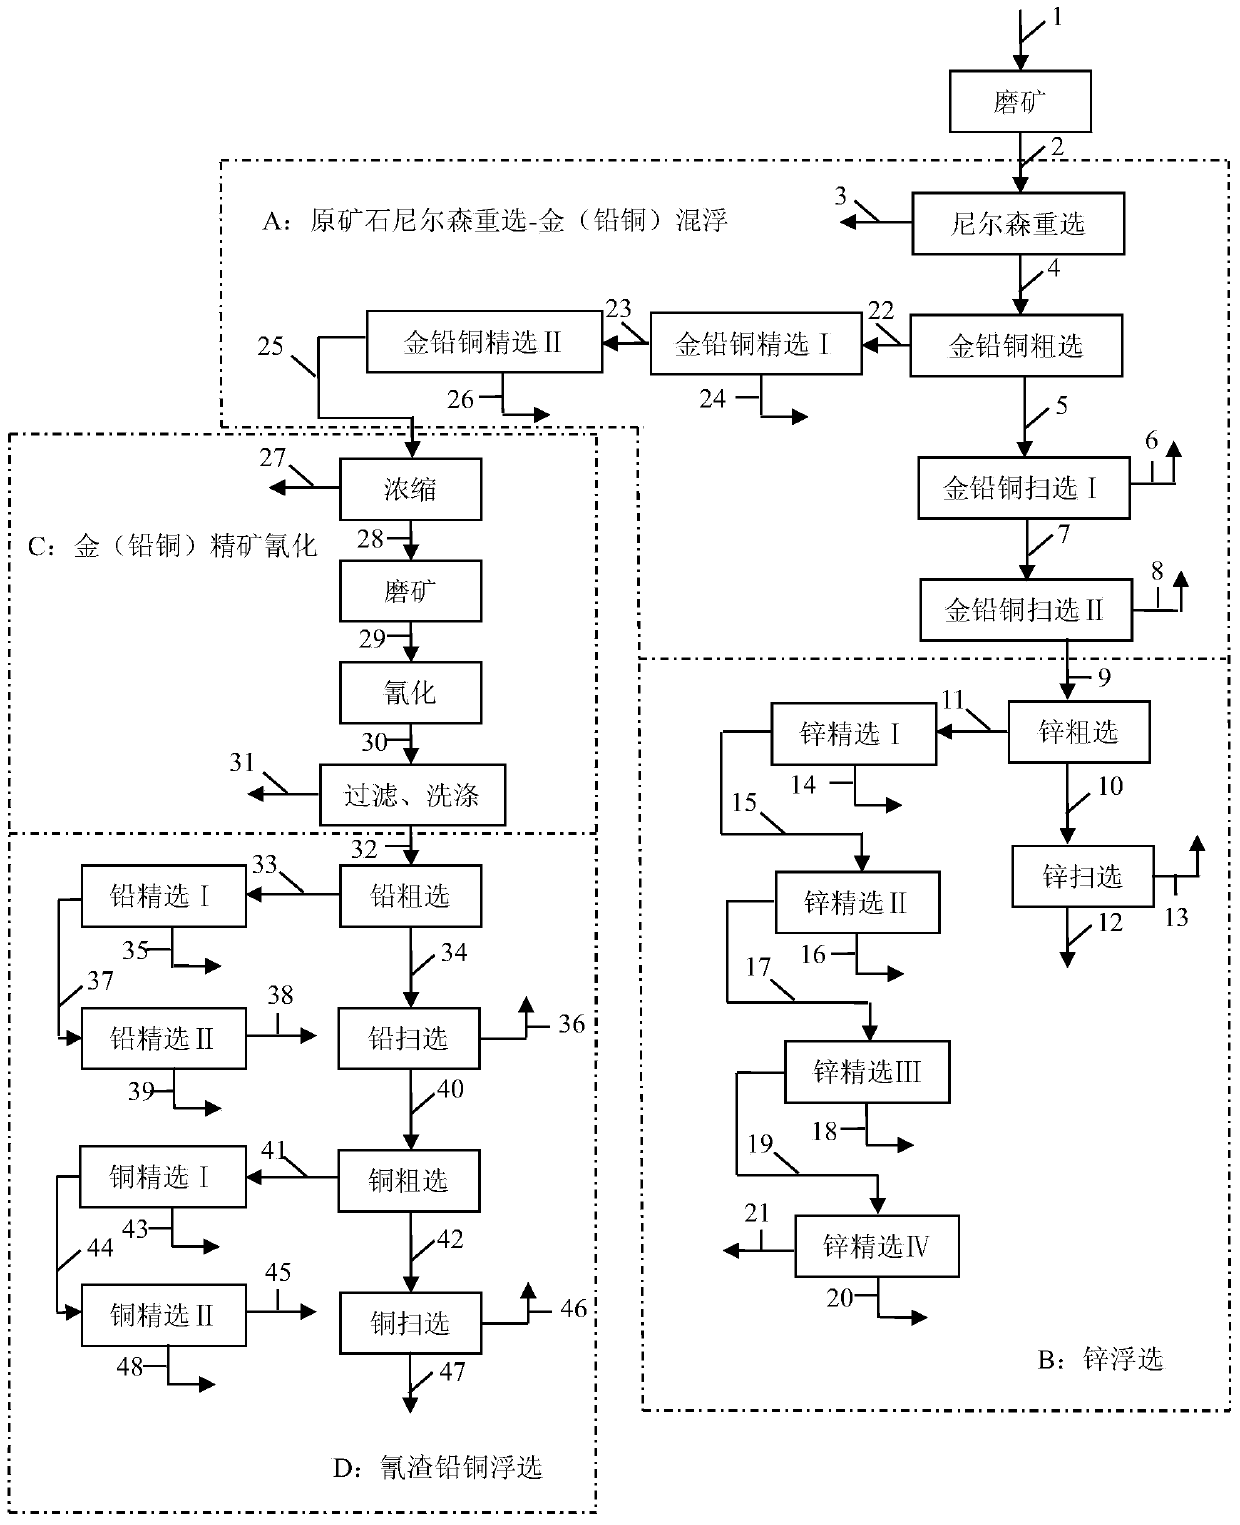 Beneficiation method for complex multi-metal sulfide electrum comprehensive recovery